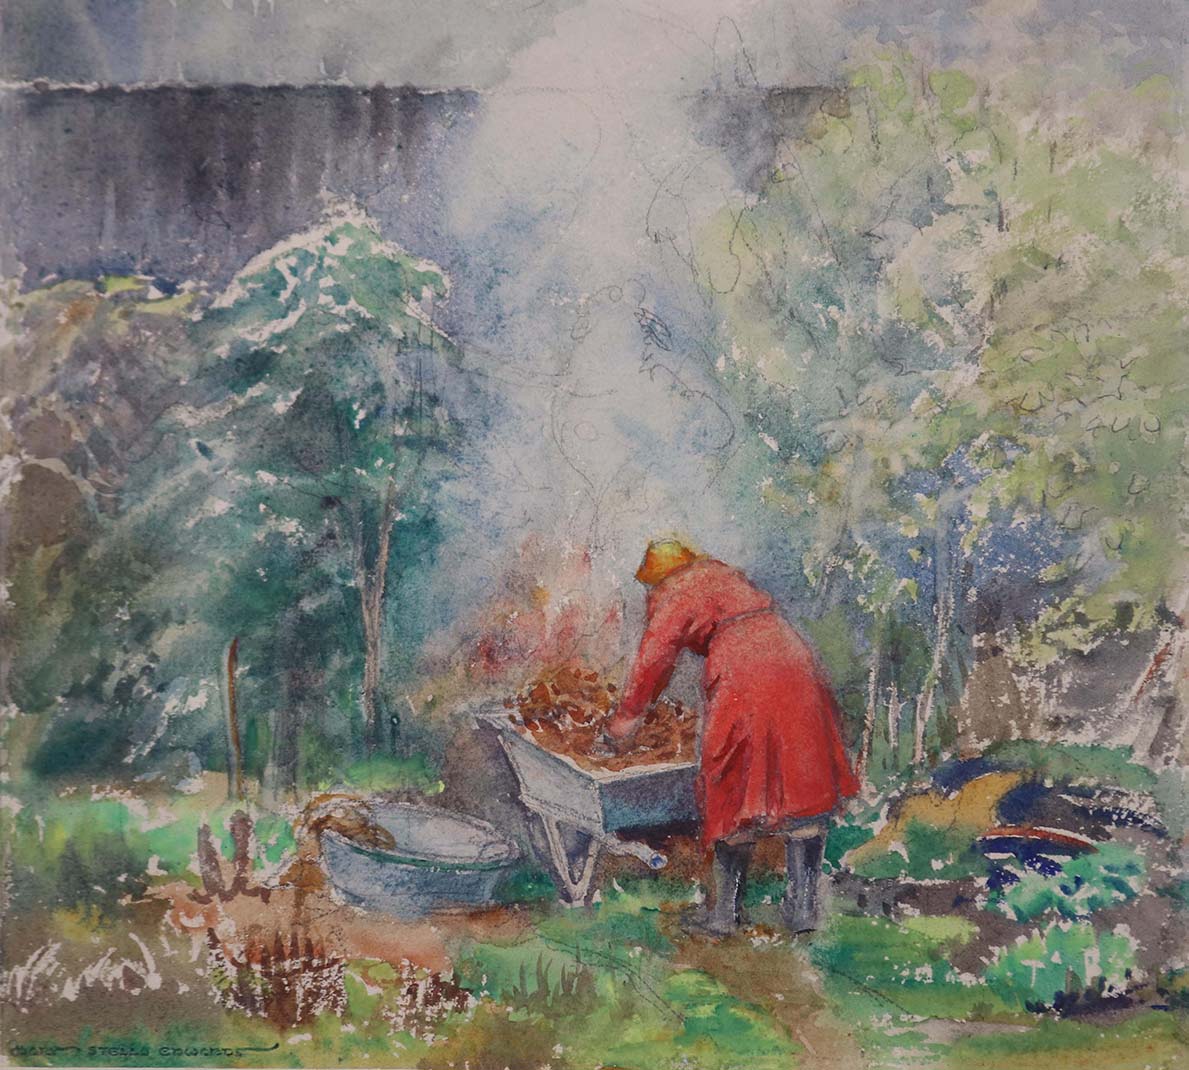 One of Mary Stella Edwards paintings - a woman leaning over a wheelbarrow having a garden fire